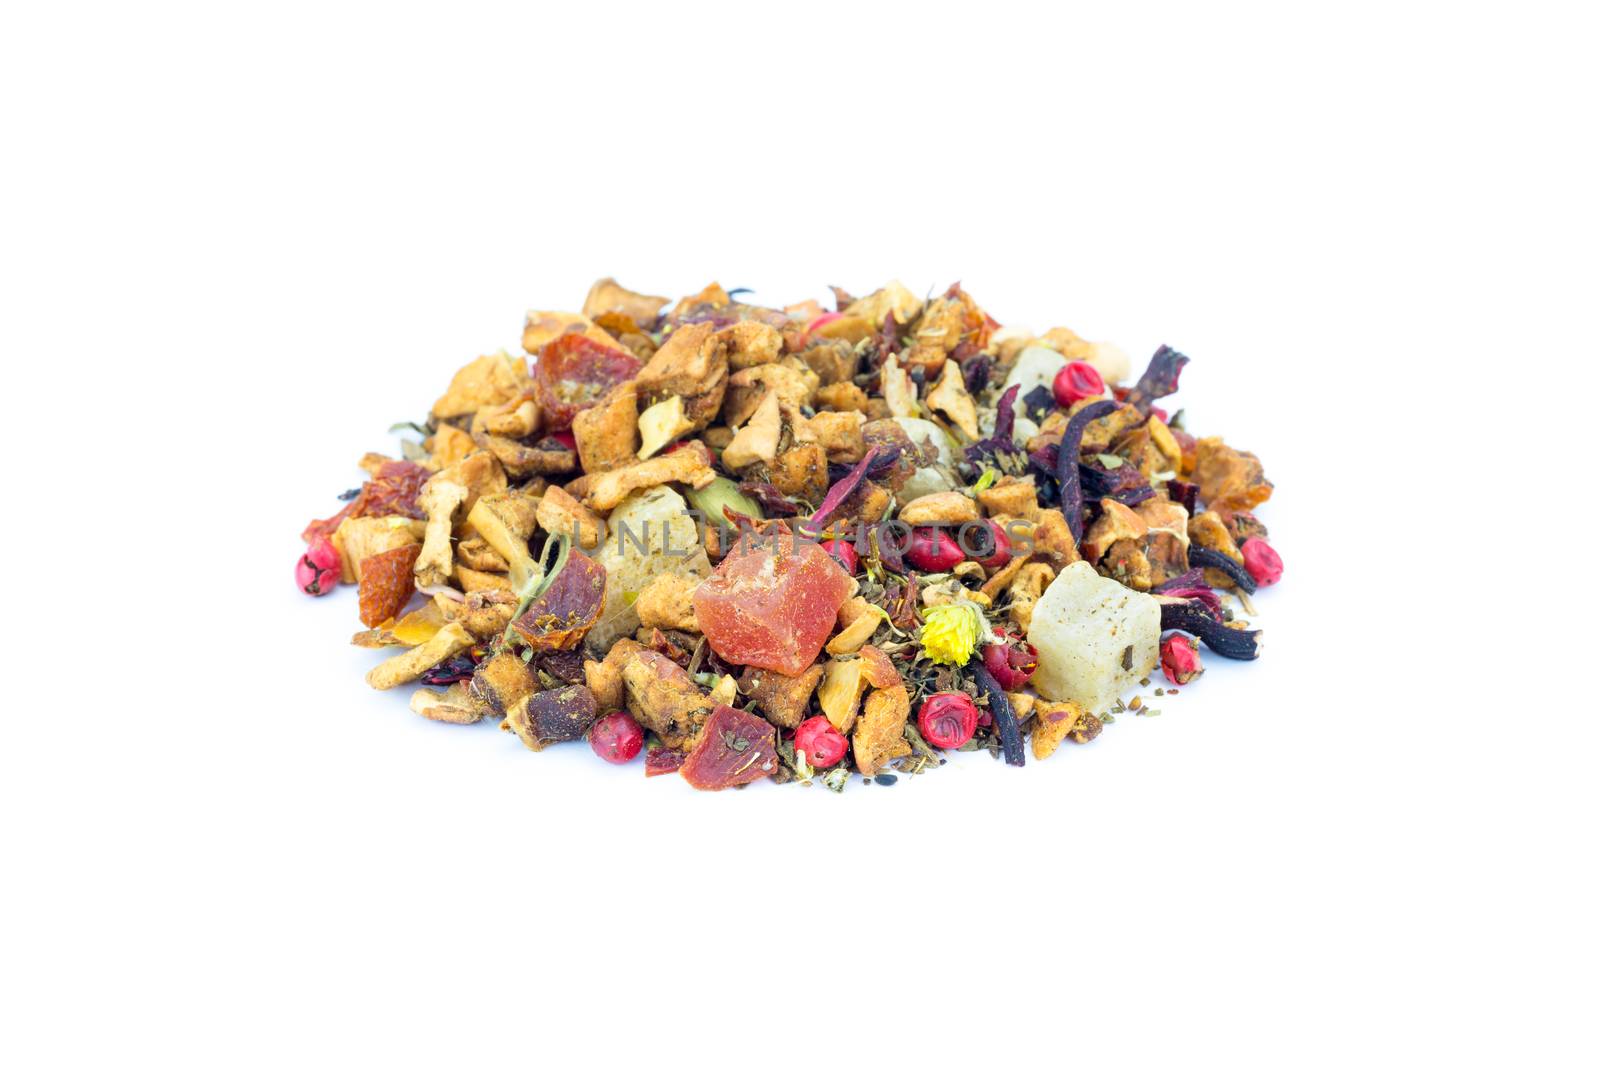 Heap of colorful loose hot pineapple tea on white by BenSchonewille